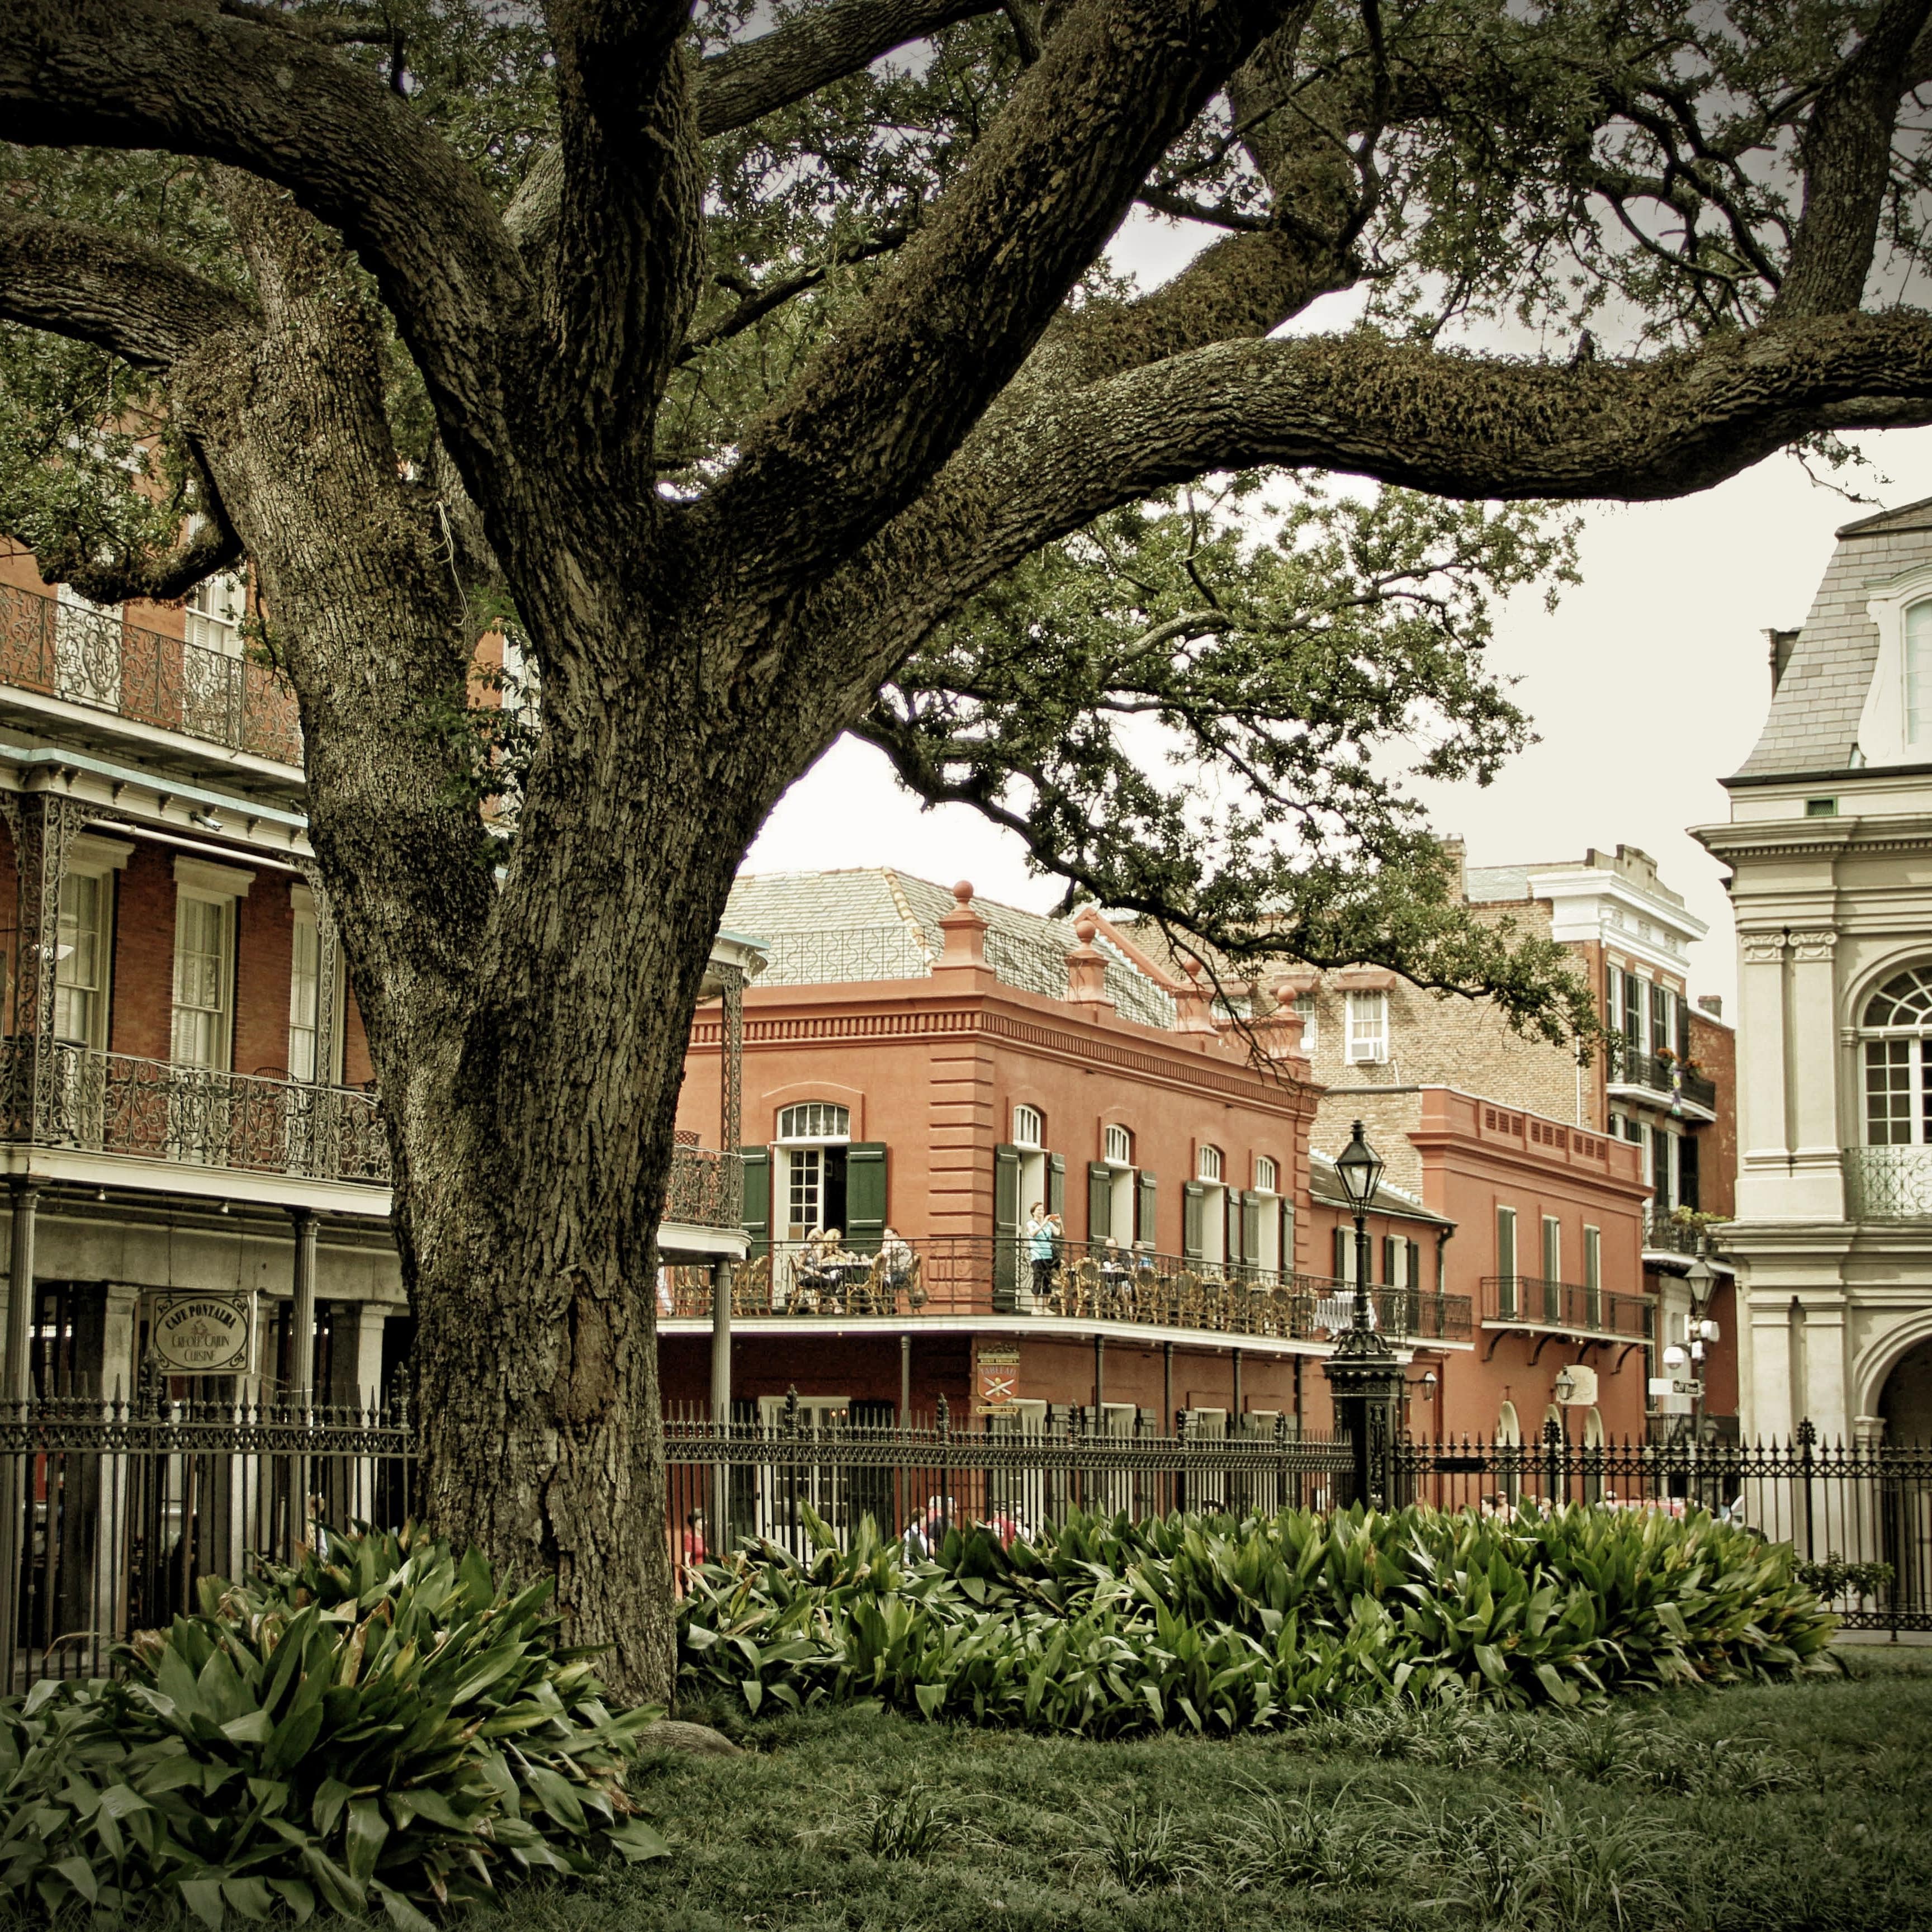 Stately buildings in the historic French Quarter of New Orleans